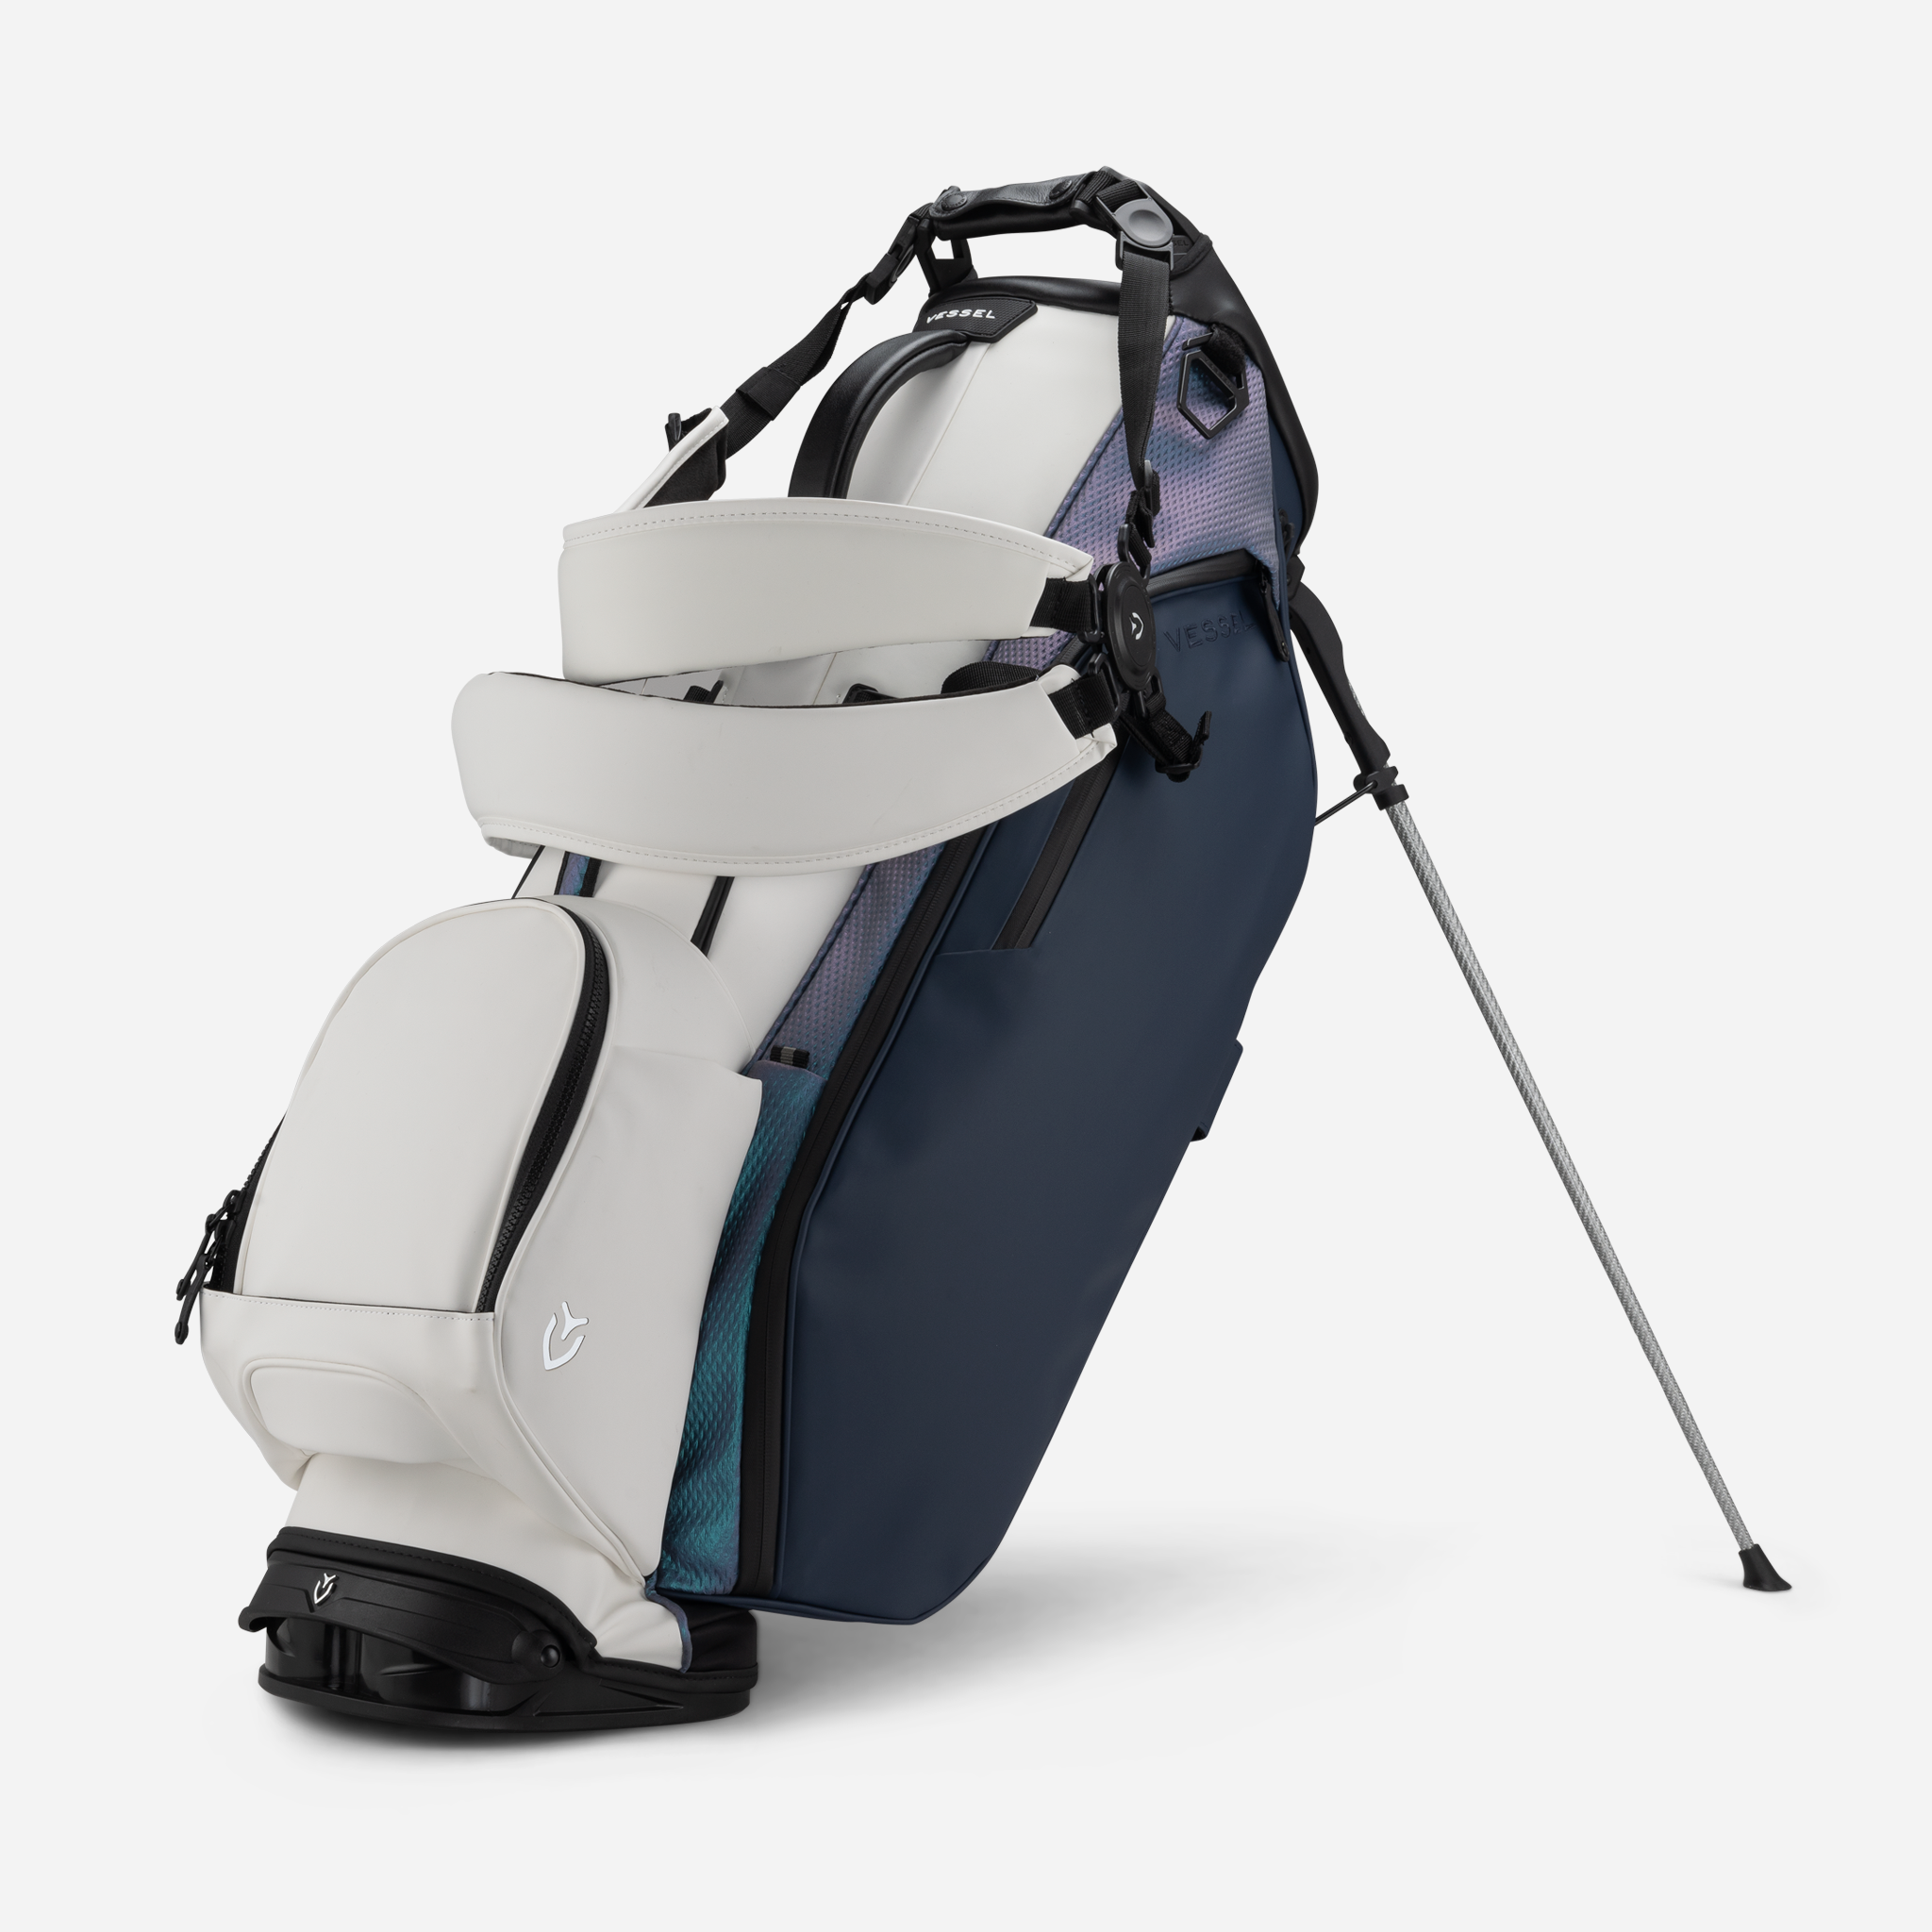 Vessel Player III Carbon Black Golf Bag Review - Plugged In Golf